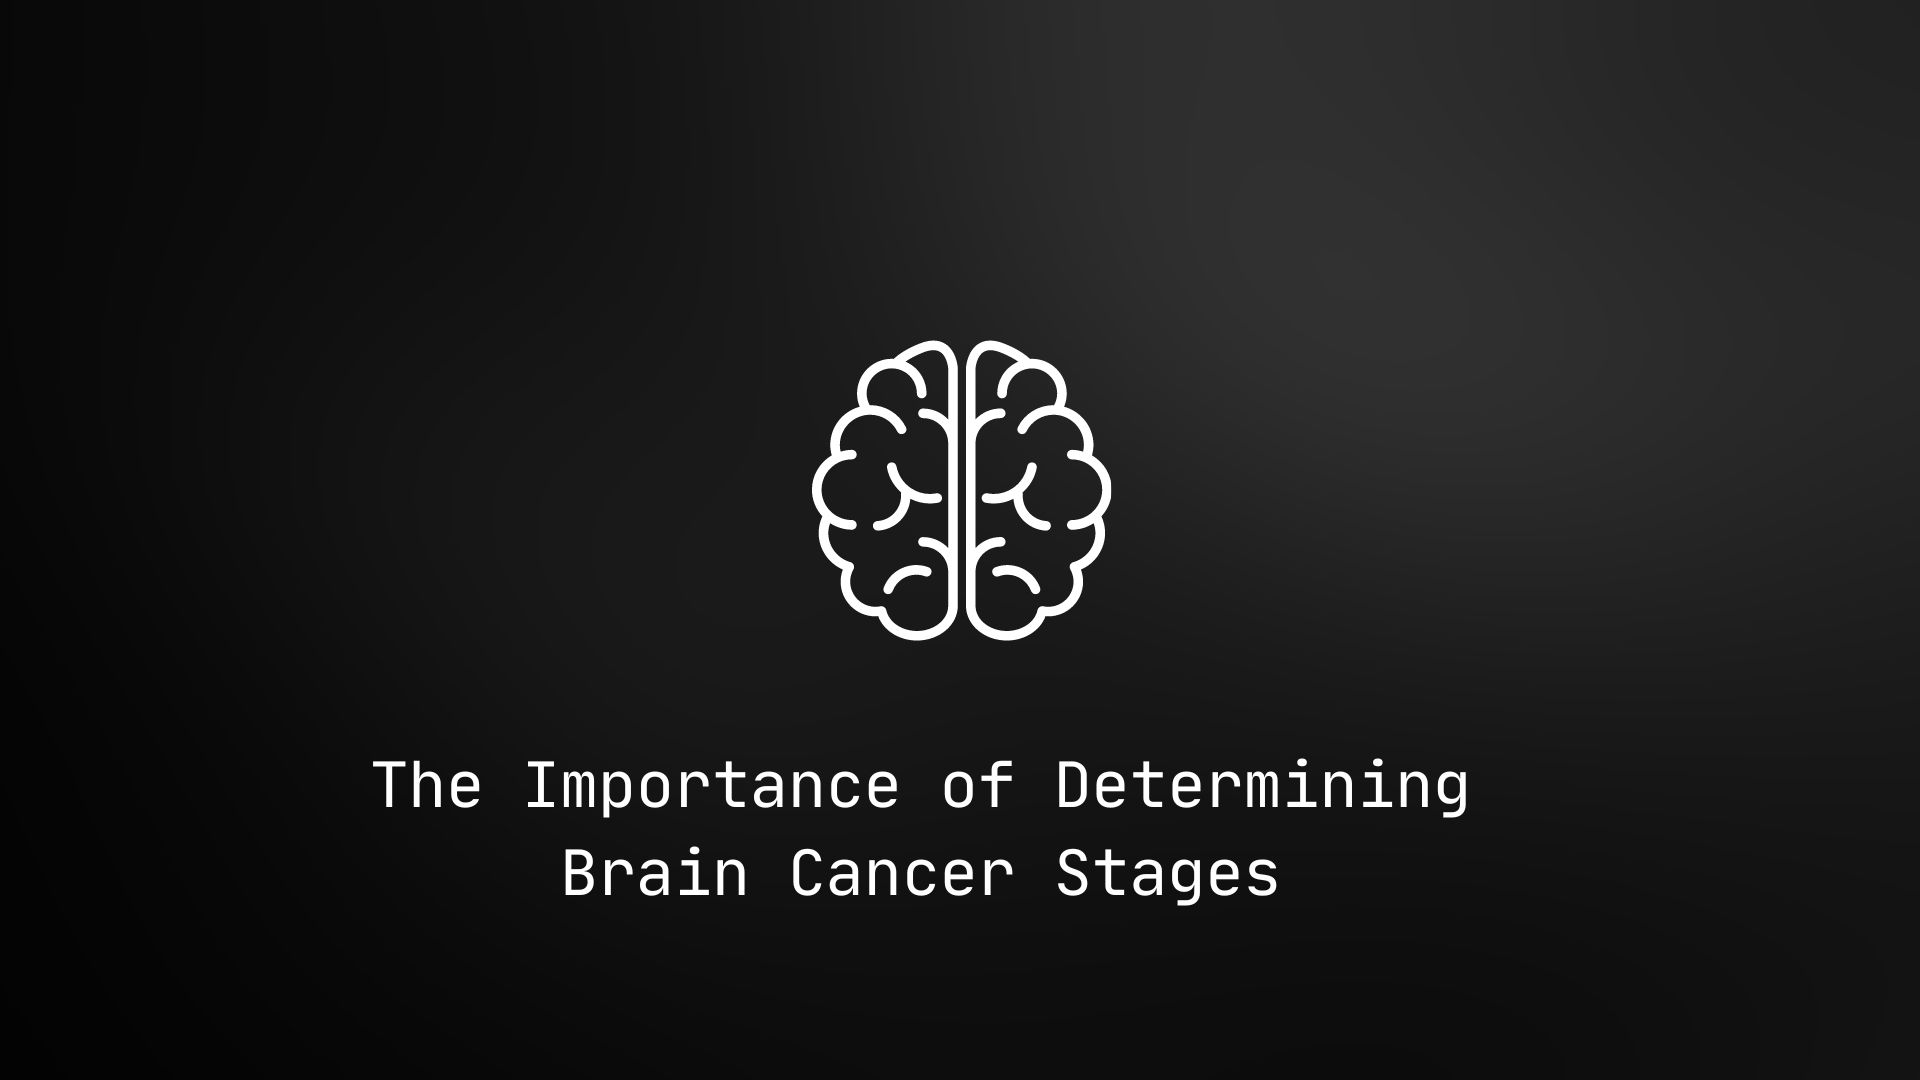 The Importance of Determining Brain Cancer Stages